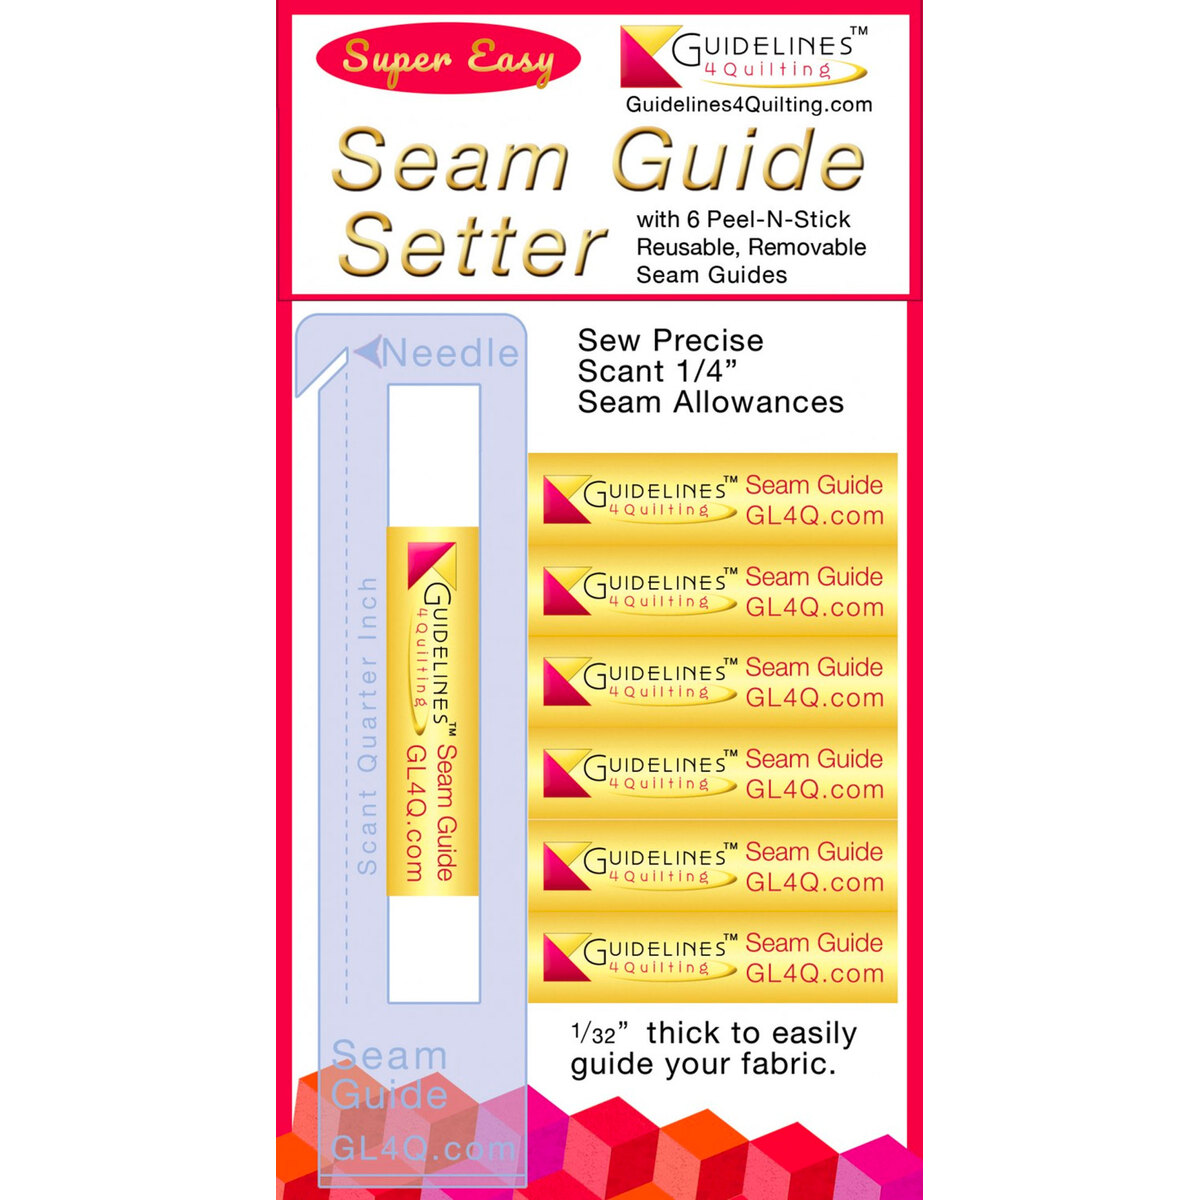 Super Easy Seam Guide Setter for an Accurate Scant ¼